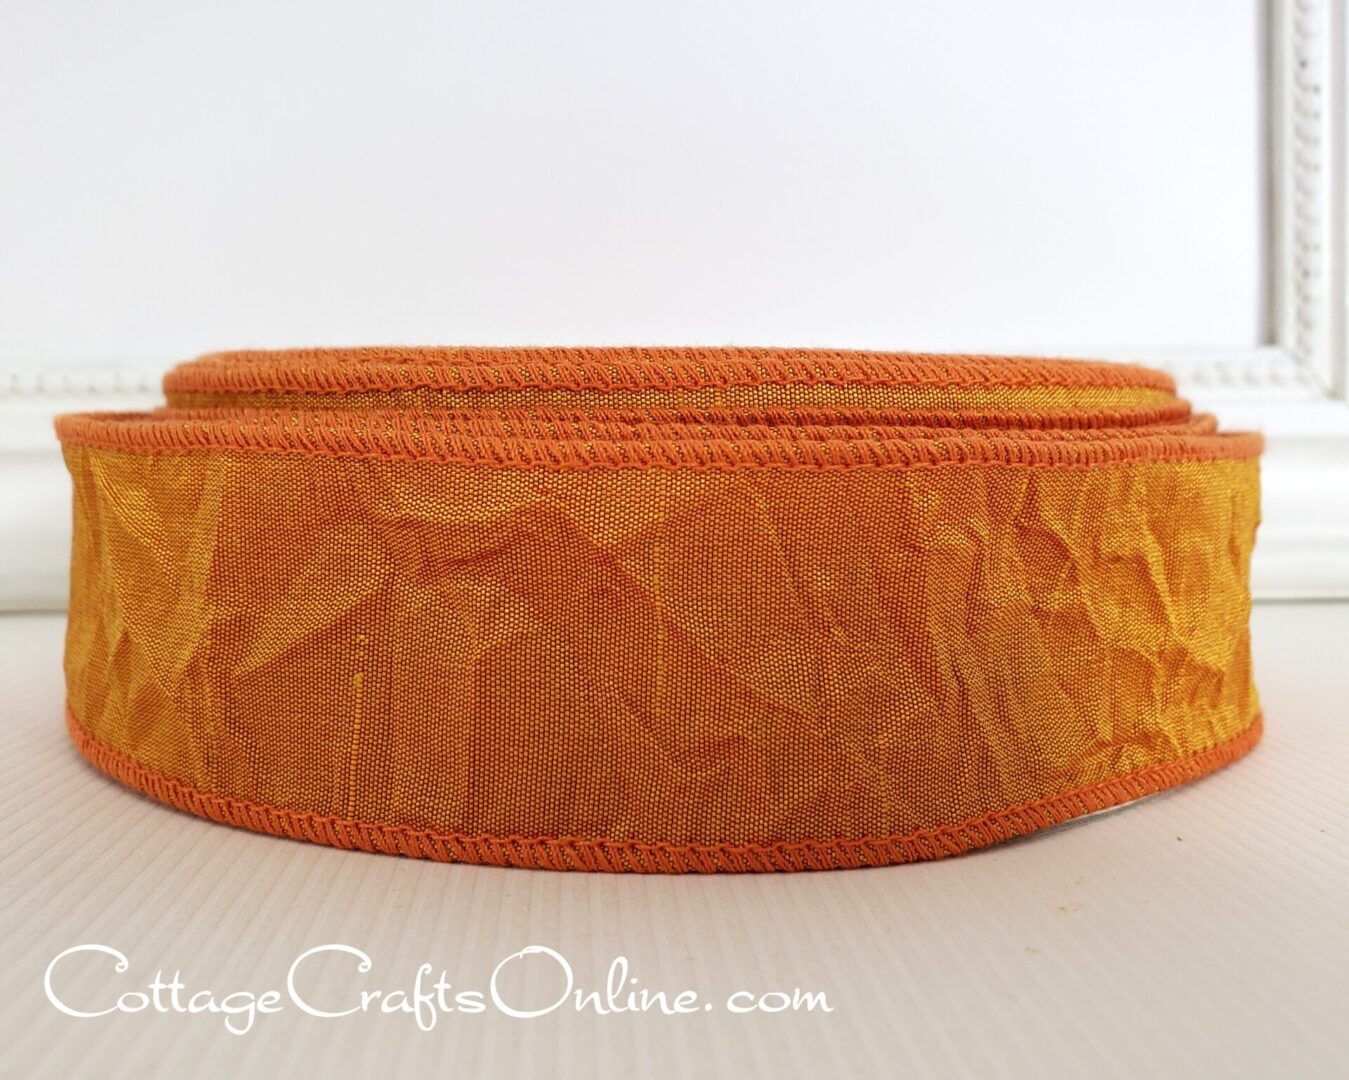 A roll of orange ribbon from Cottage Crafts Online on a white table.